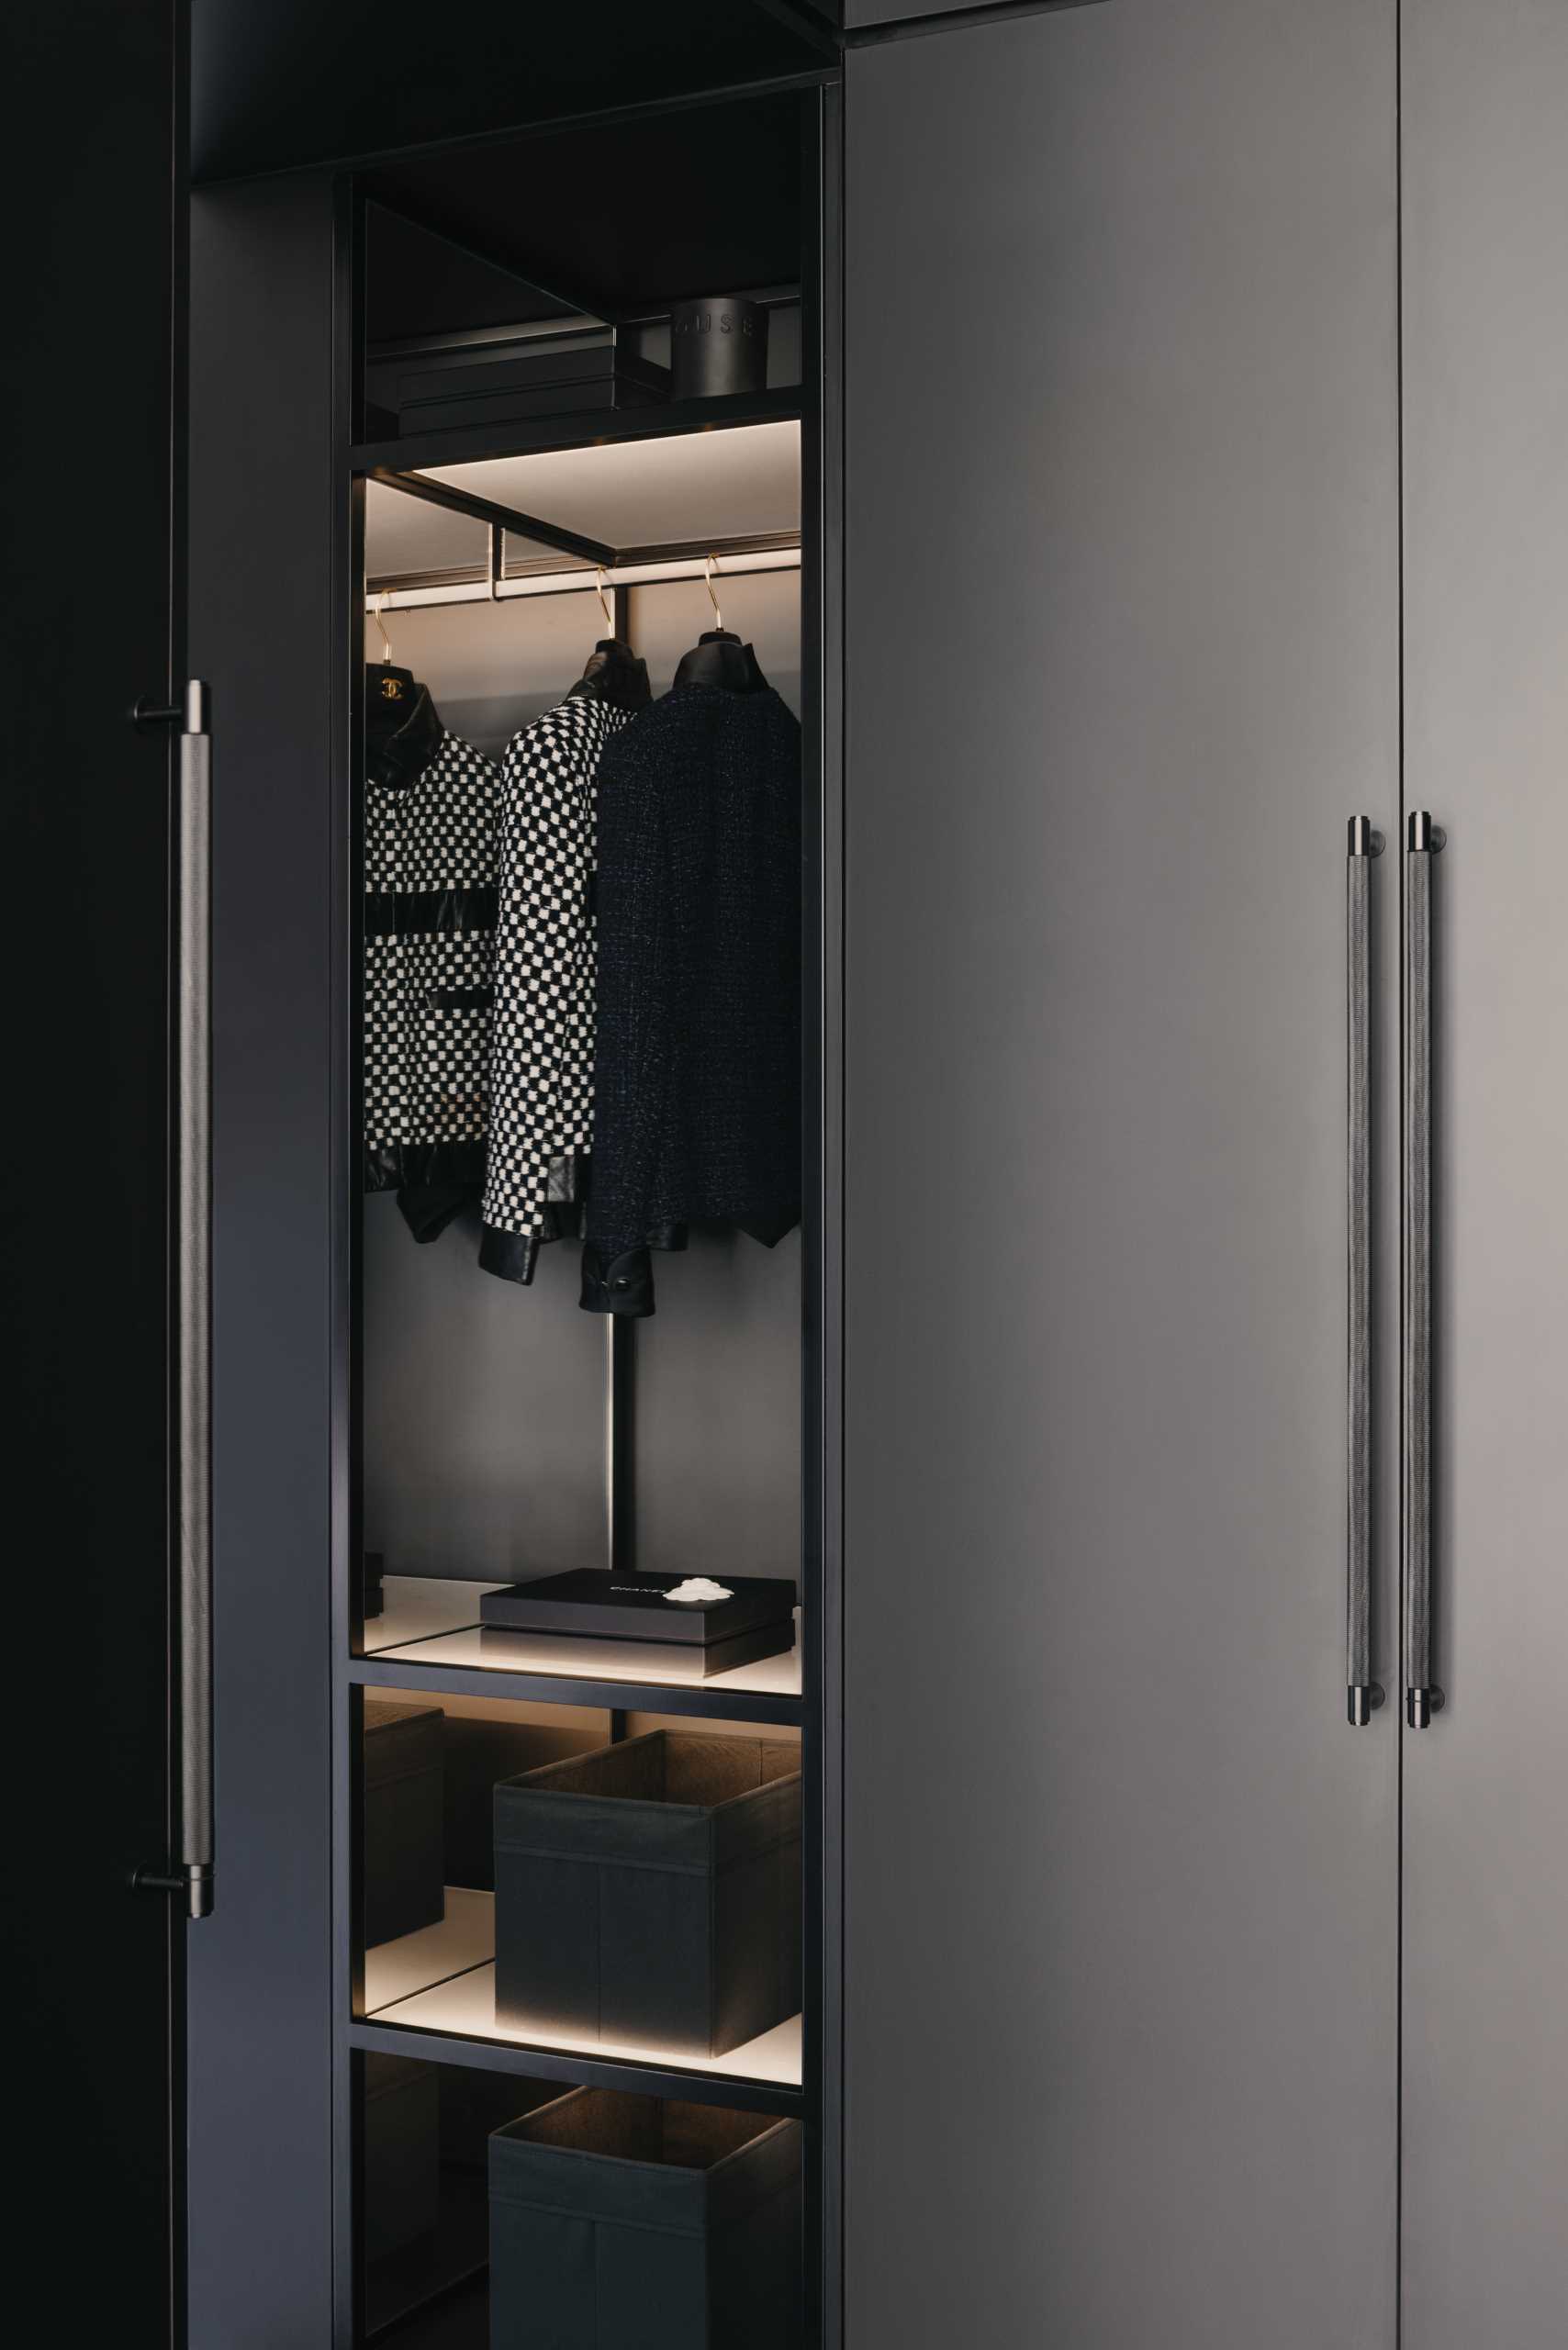 A white sliding door in a bedroom opens to reveal a walk-in closet and dressing room, where a pair of mirrors hang from the ceiling, and black closet cabinetry with hidden lighting creates a luxurious atmosphere.